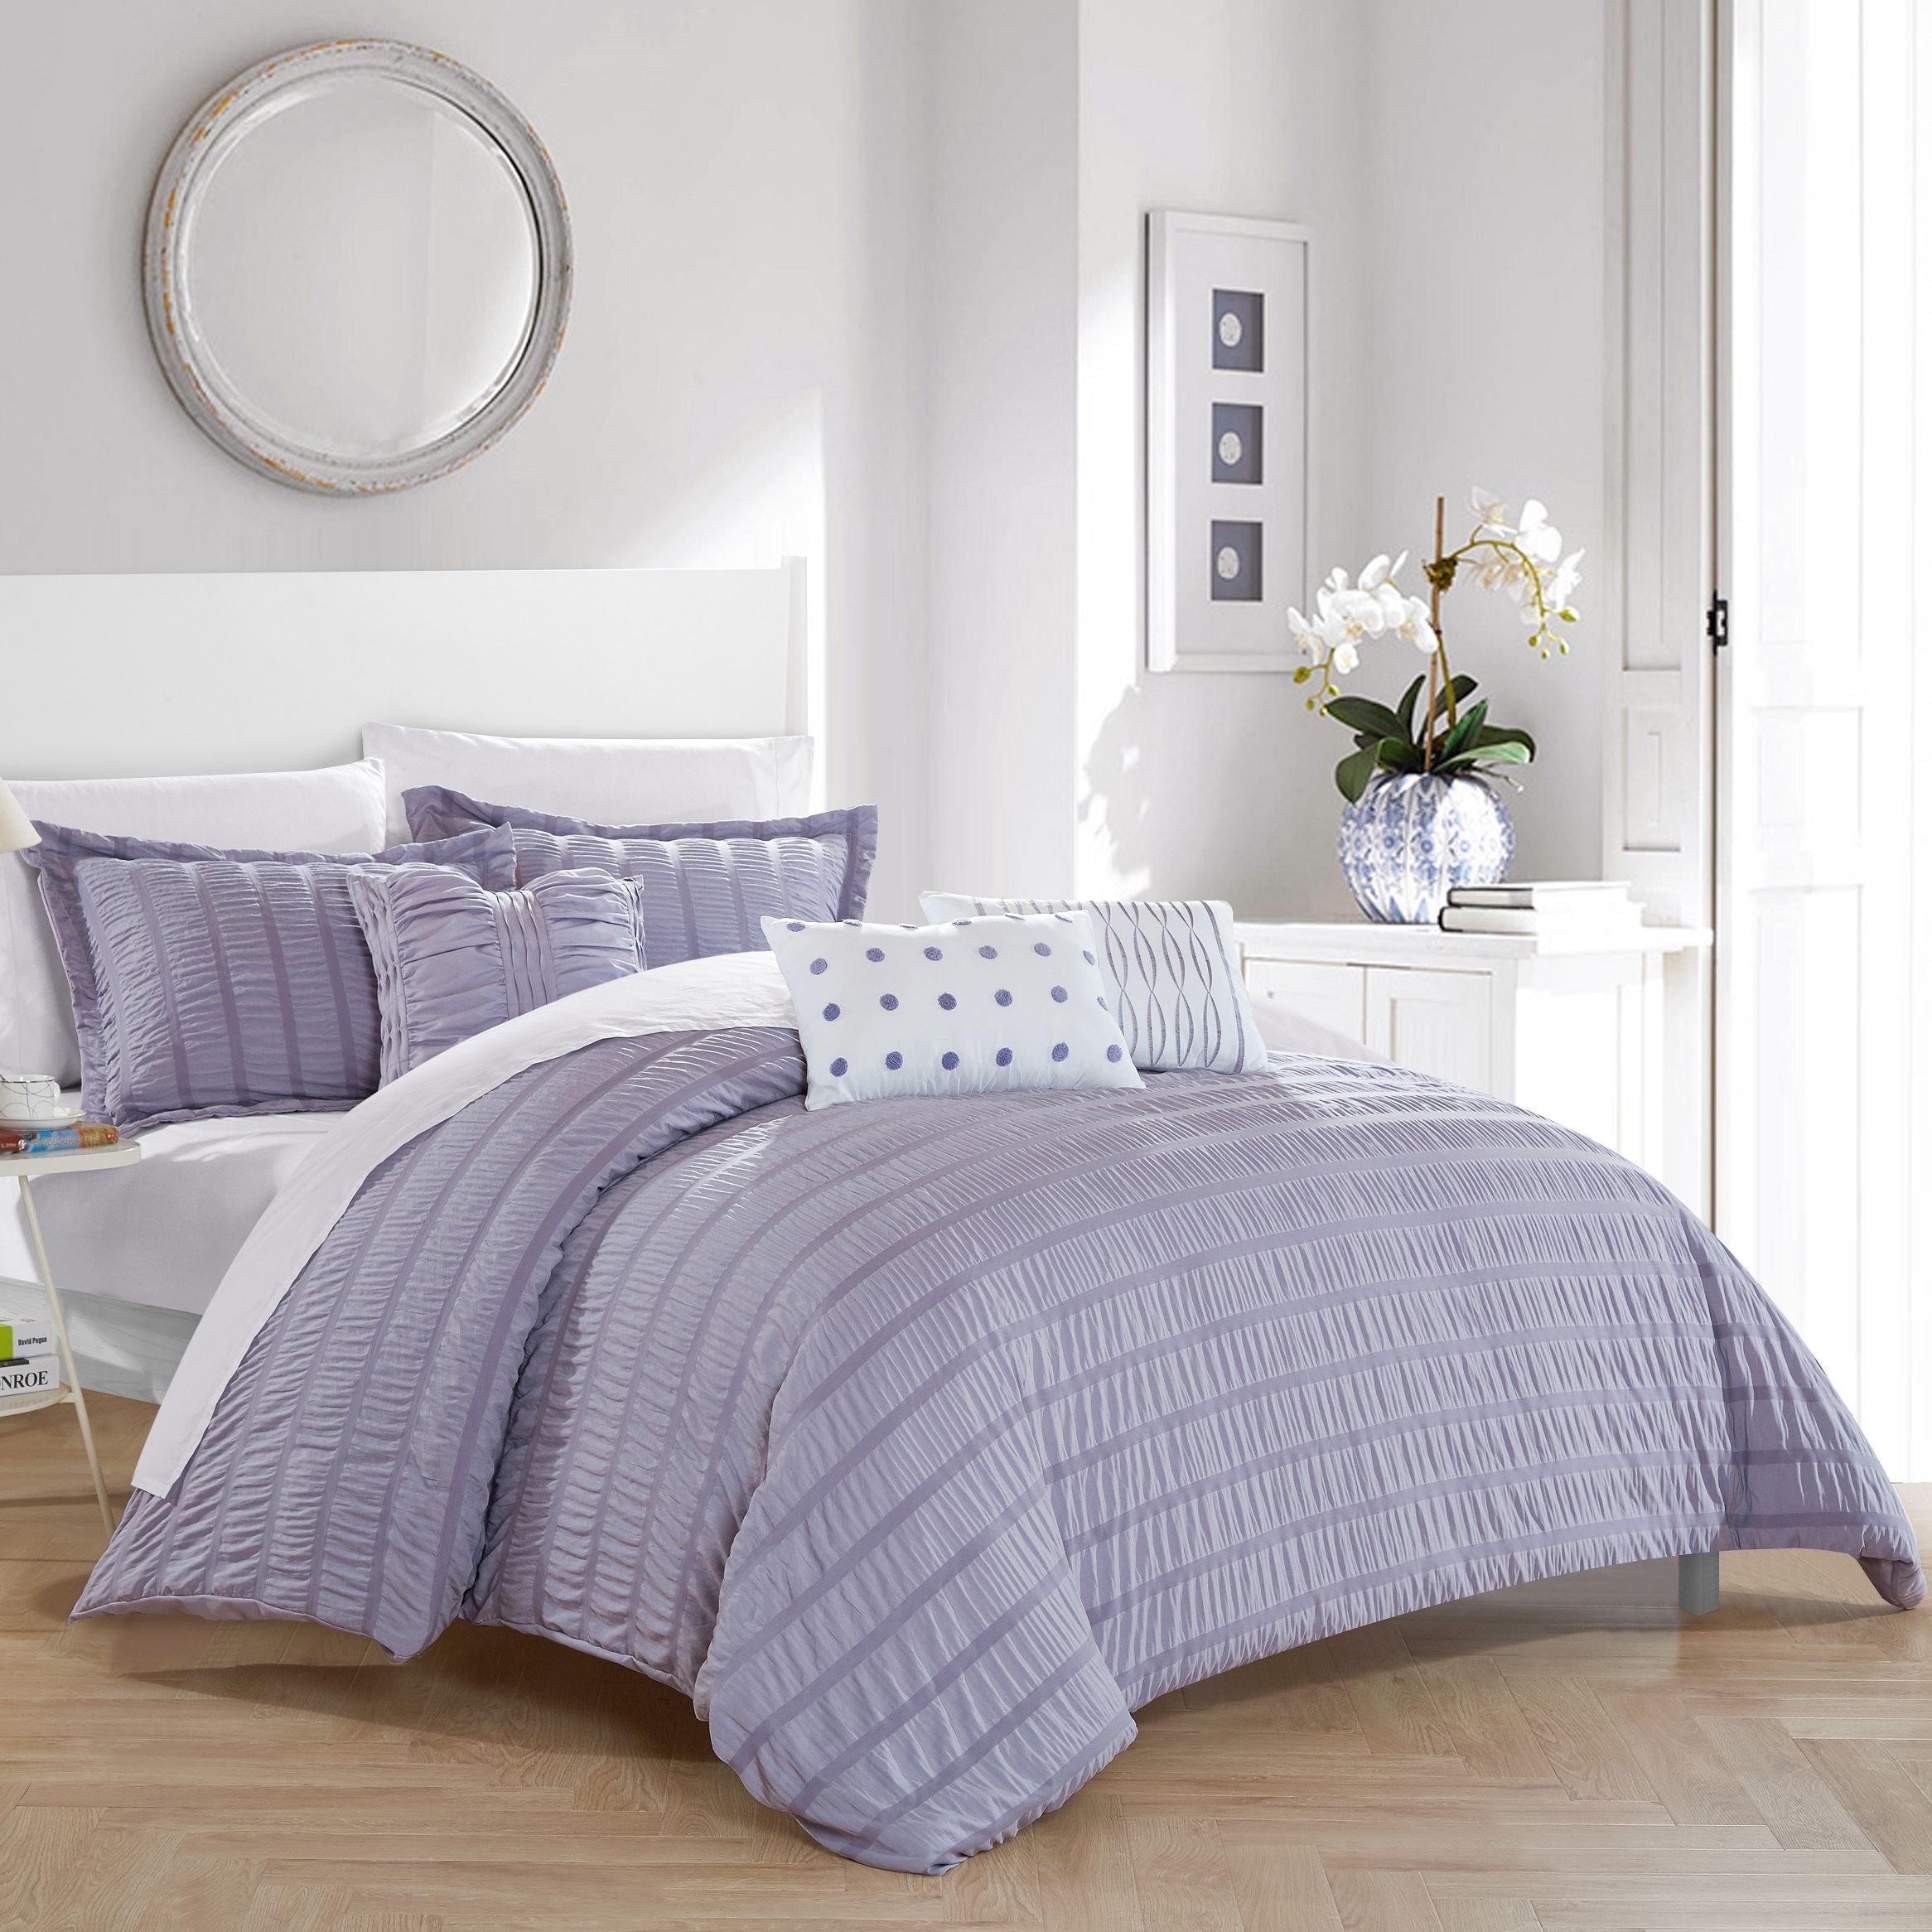 Daza 6 Or 5 Piece Comforter Set Striped Ruched Ruffled Bedding - Lavender, Queen